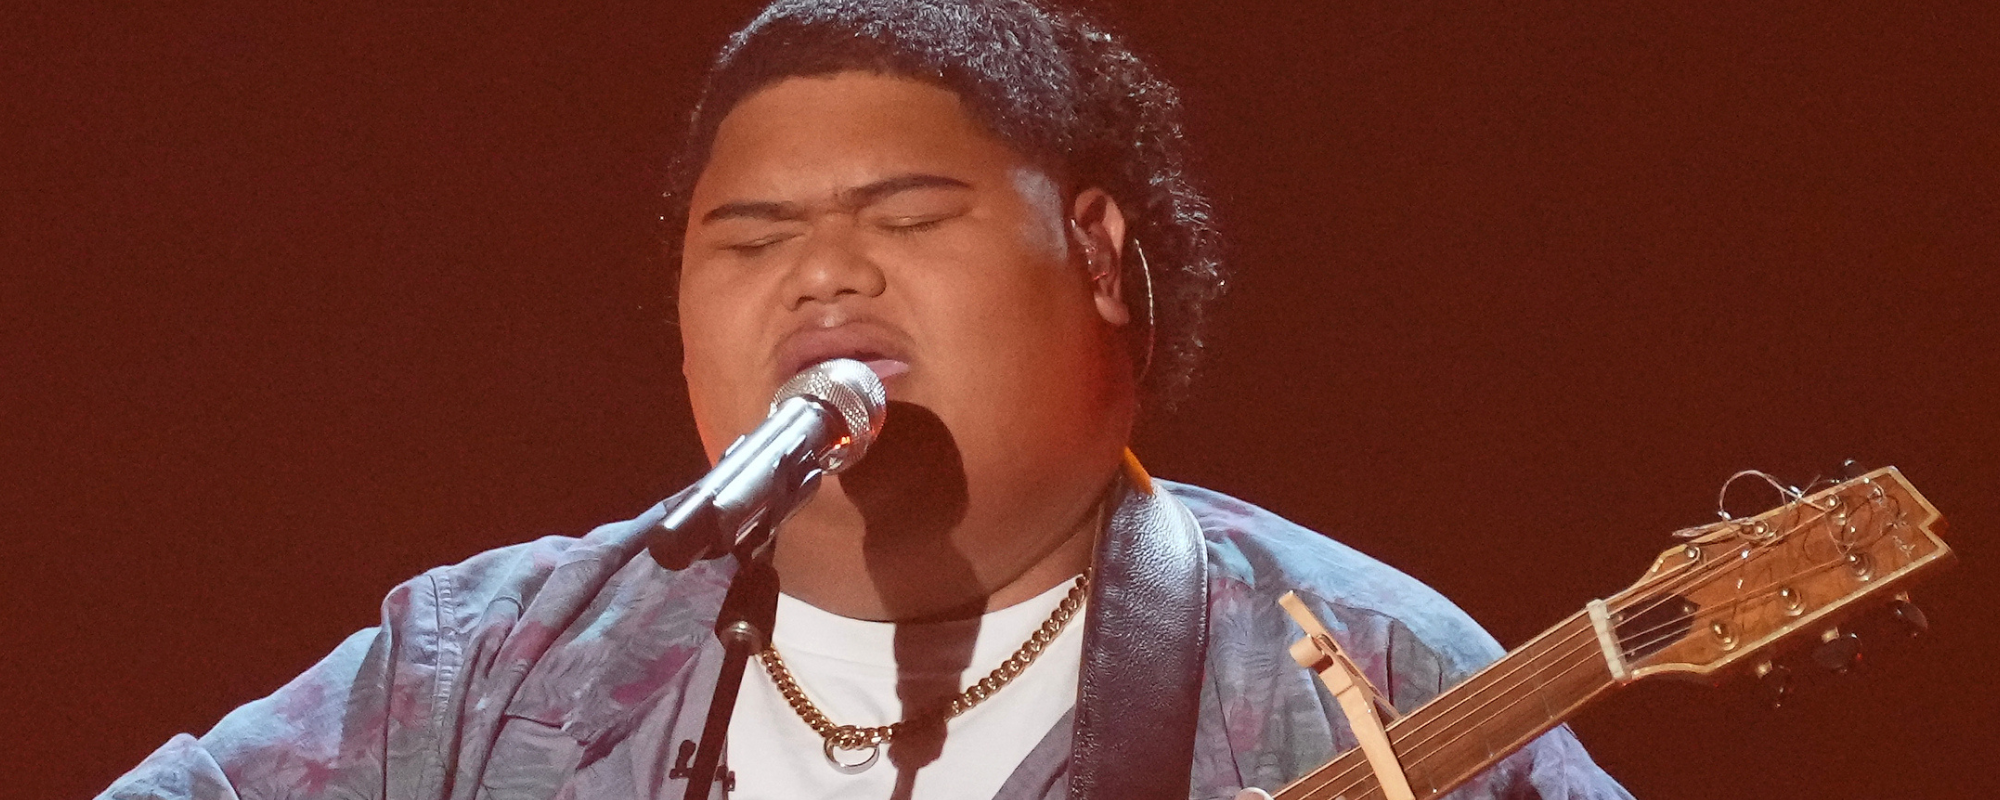 Iam Tongi Wows the Crowd Again on ‘American Idol’ with Cover of “The Winner Takes It All”